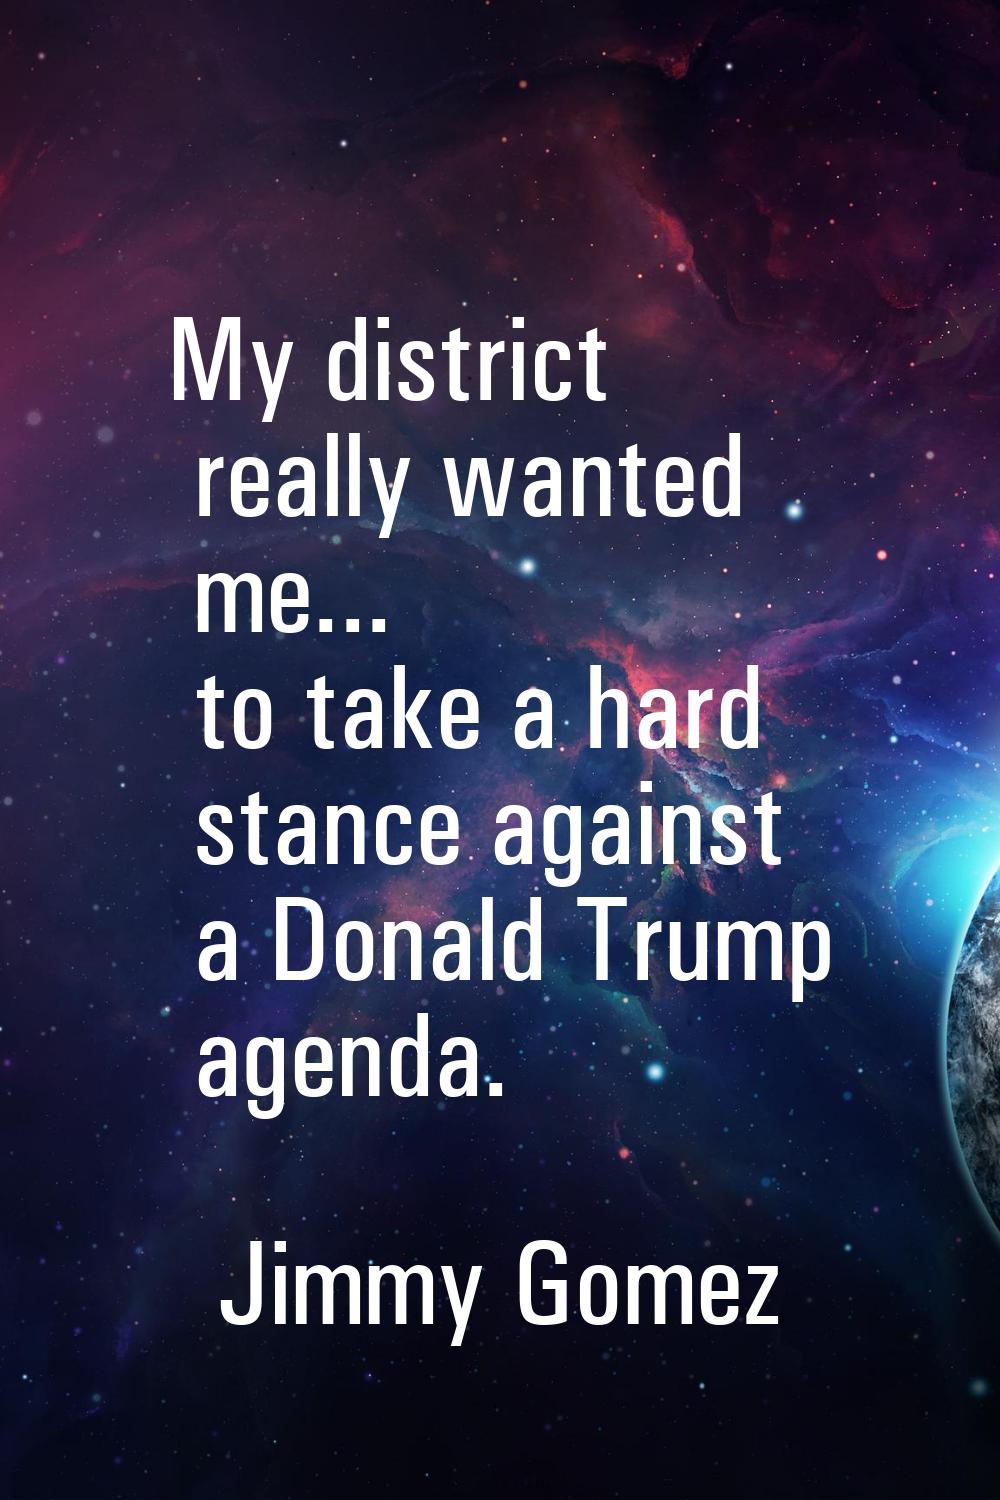 My district really wanted me... to take a hard stance against a Donald Trump agenda.